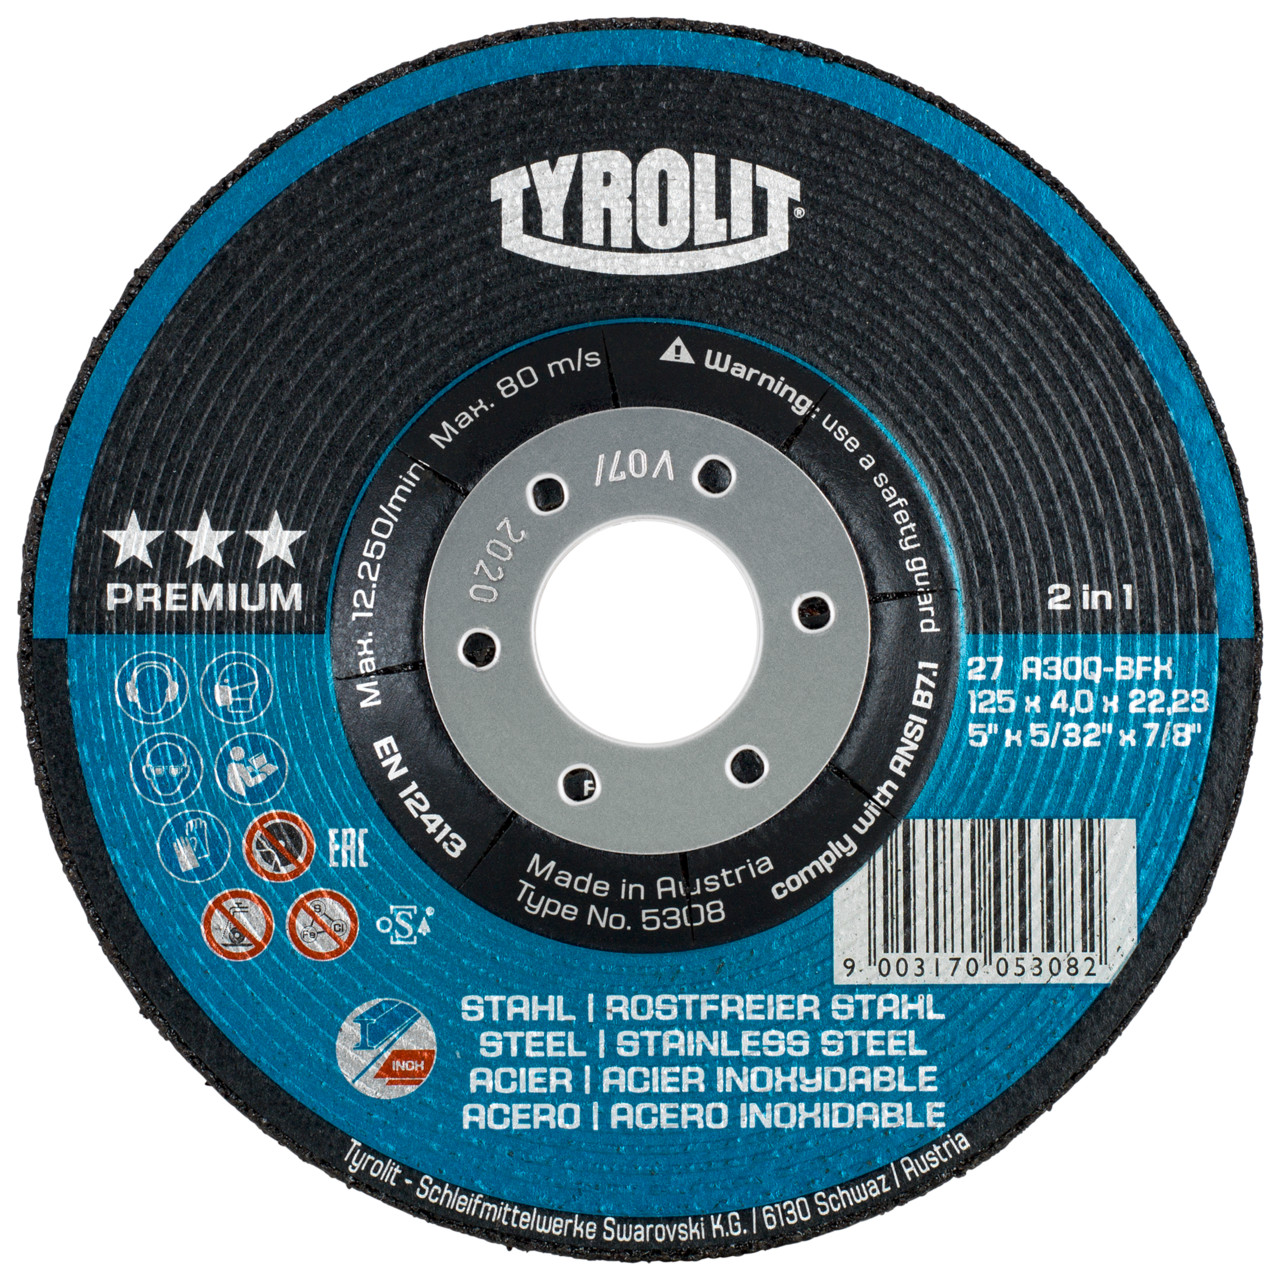 Tyrolit Roughing disc DxUxH 115x4x22.23 2in1 for steel and stainless steel, shape: 27 - offset version, Art. 5287